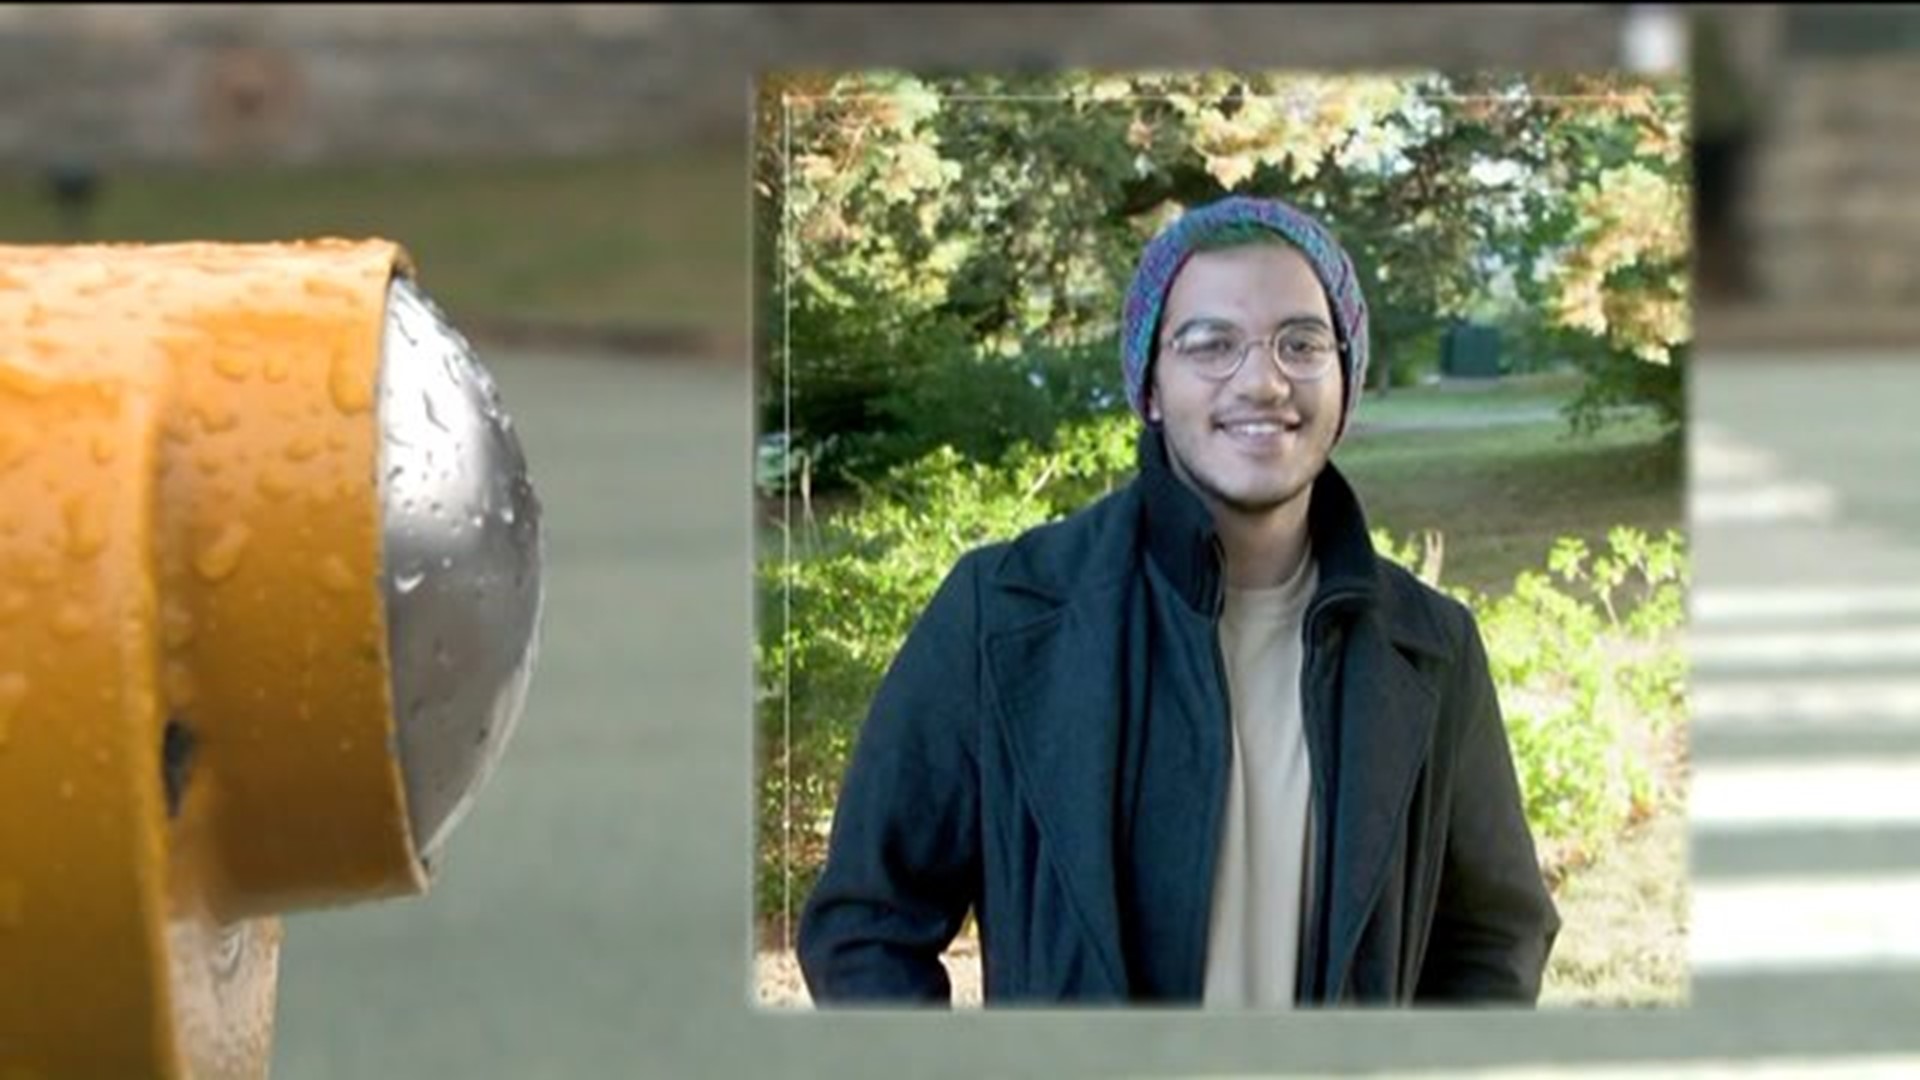 Friends, classmates remember Conn. College student killed in hit-and-run